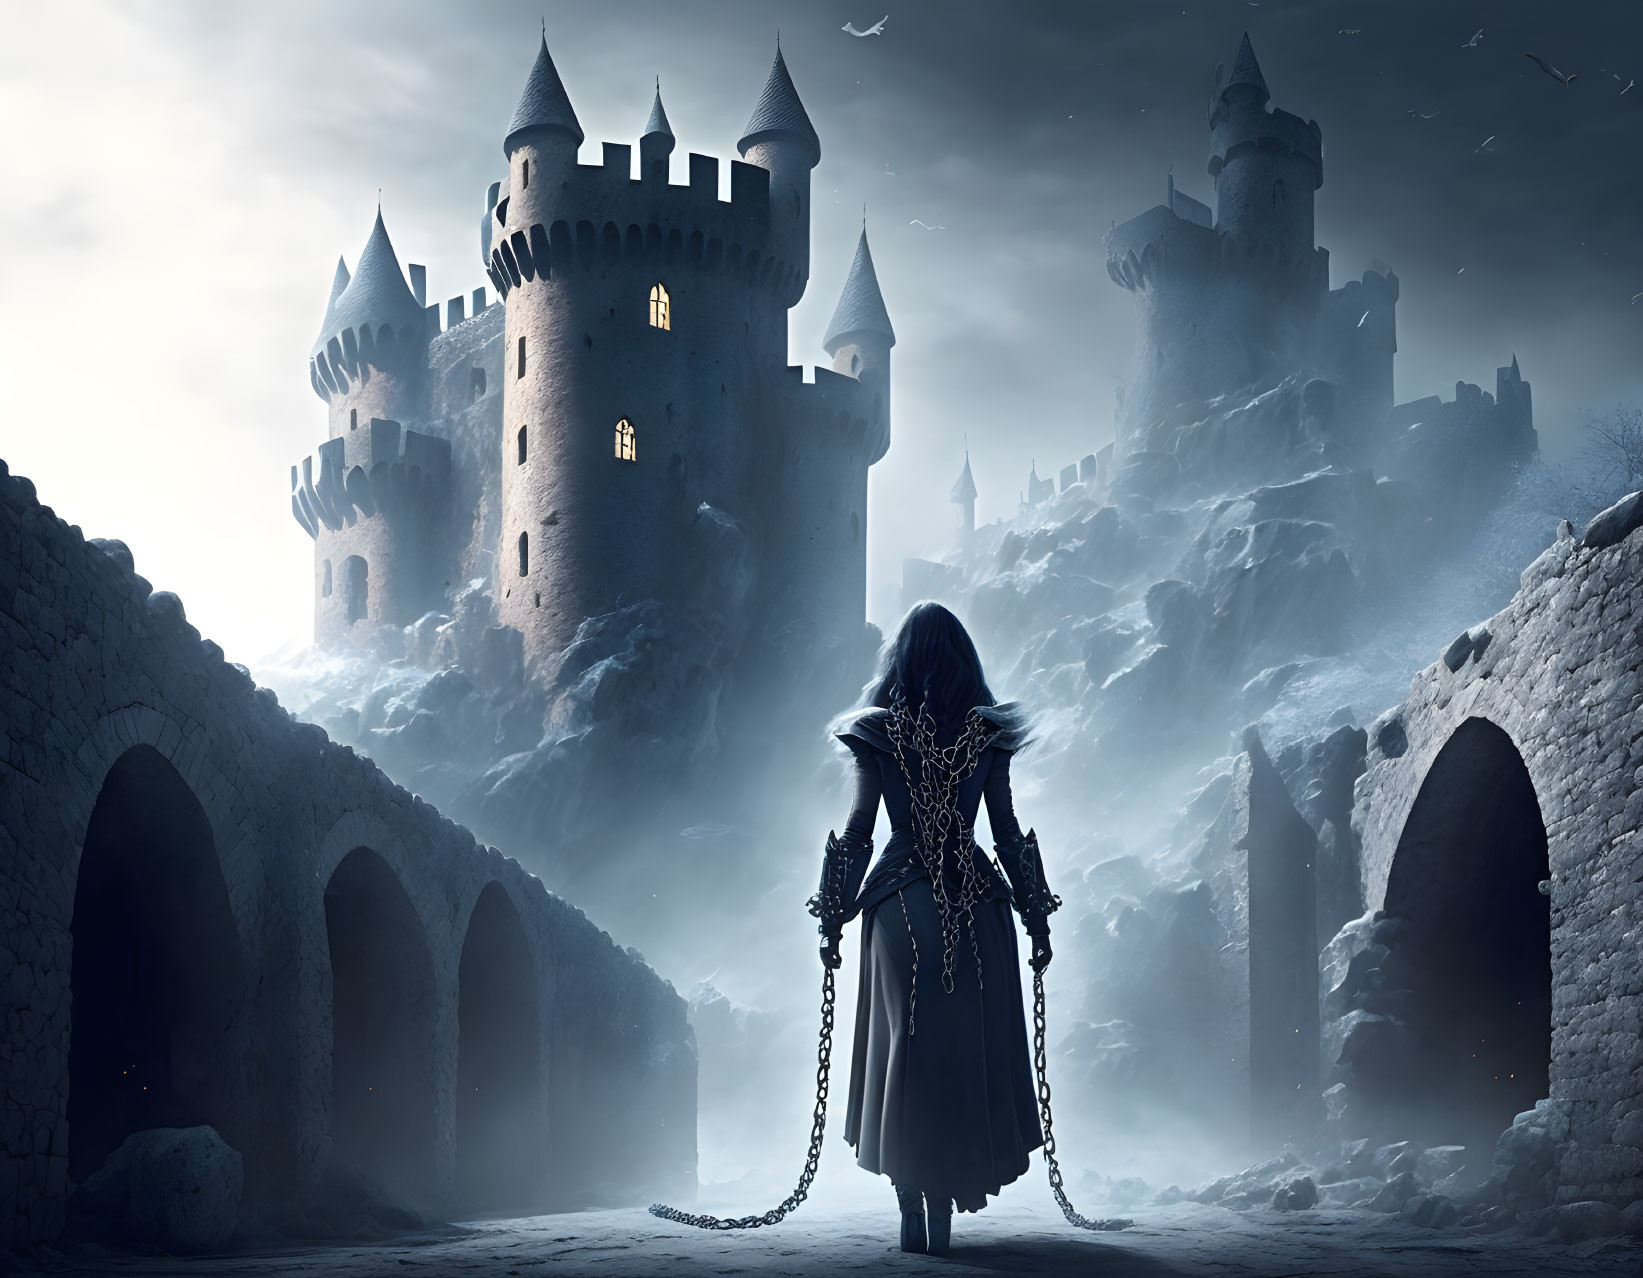 Dark-armored figure in front of towering castle under twilight sky.